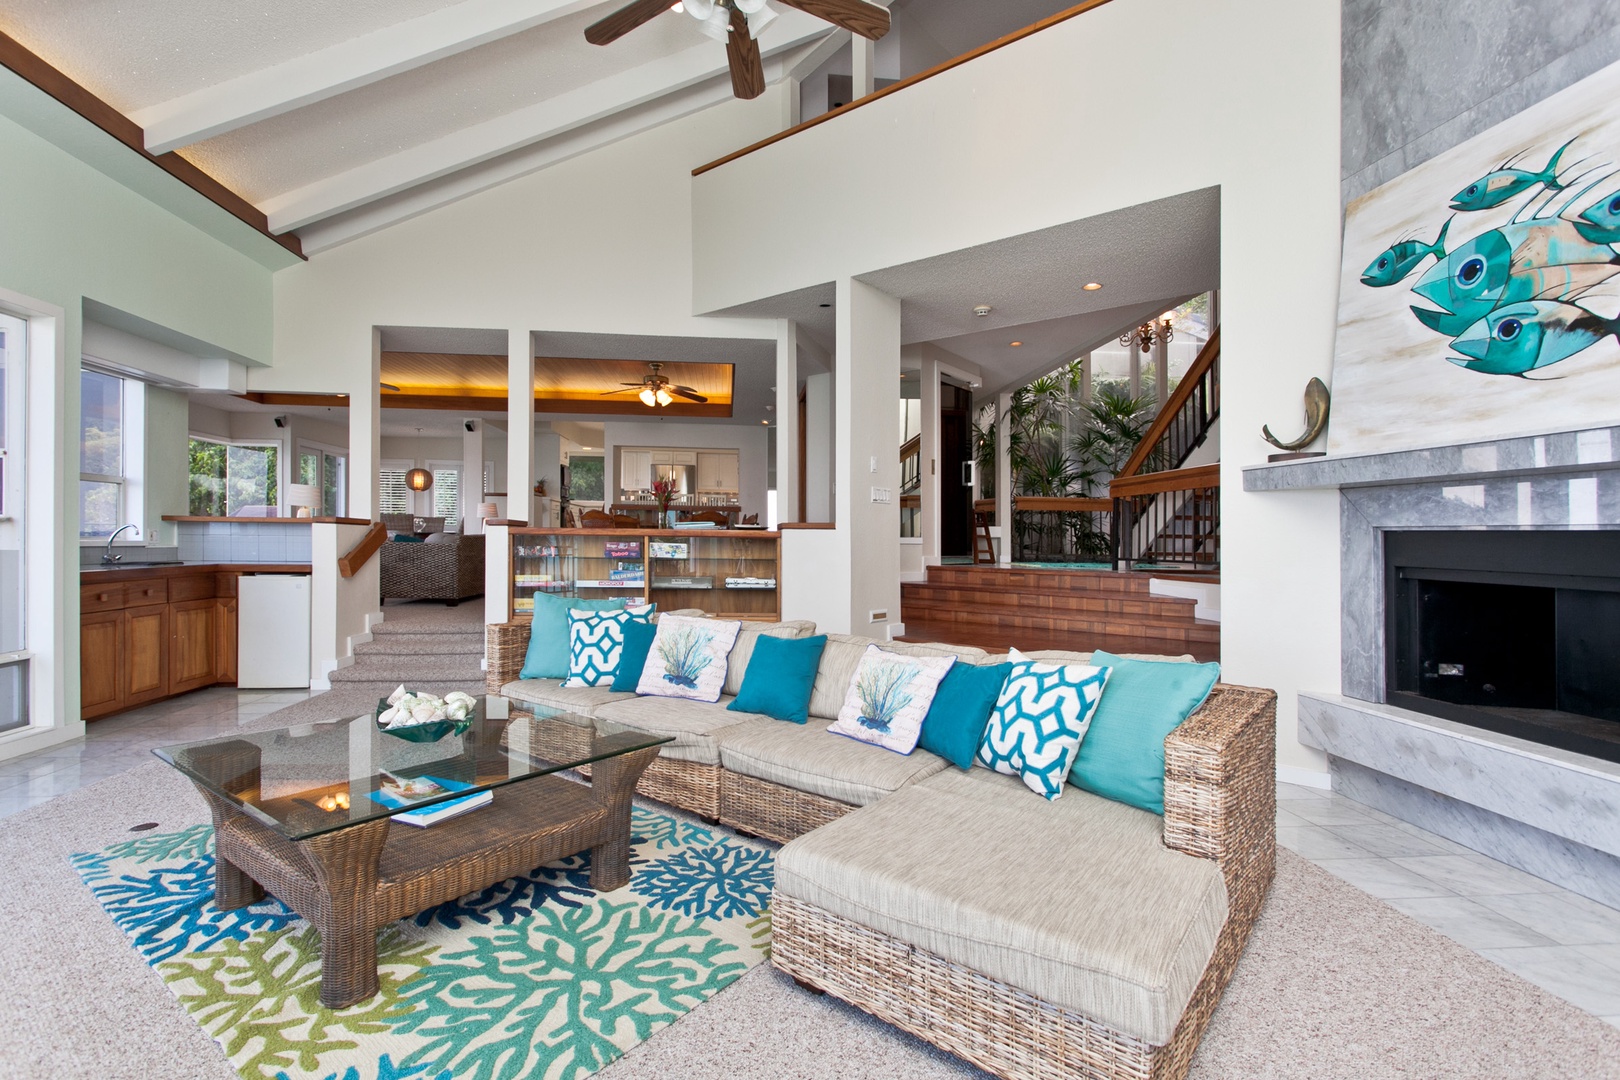 Kailua Vacation Rentals, Hale Kolea* - Relax in coastal elegance - your open-plan living space designed for comfort and style.